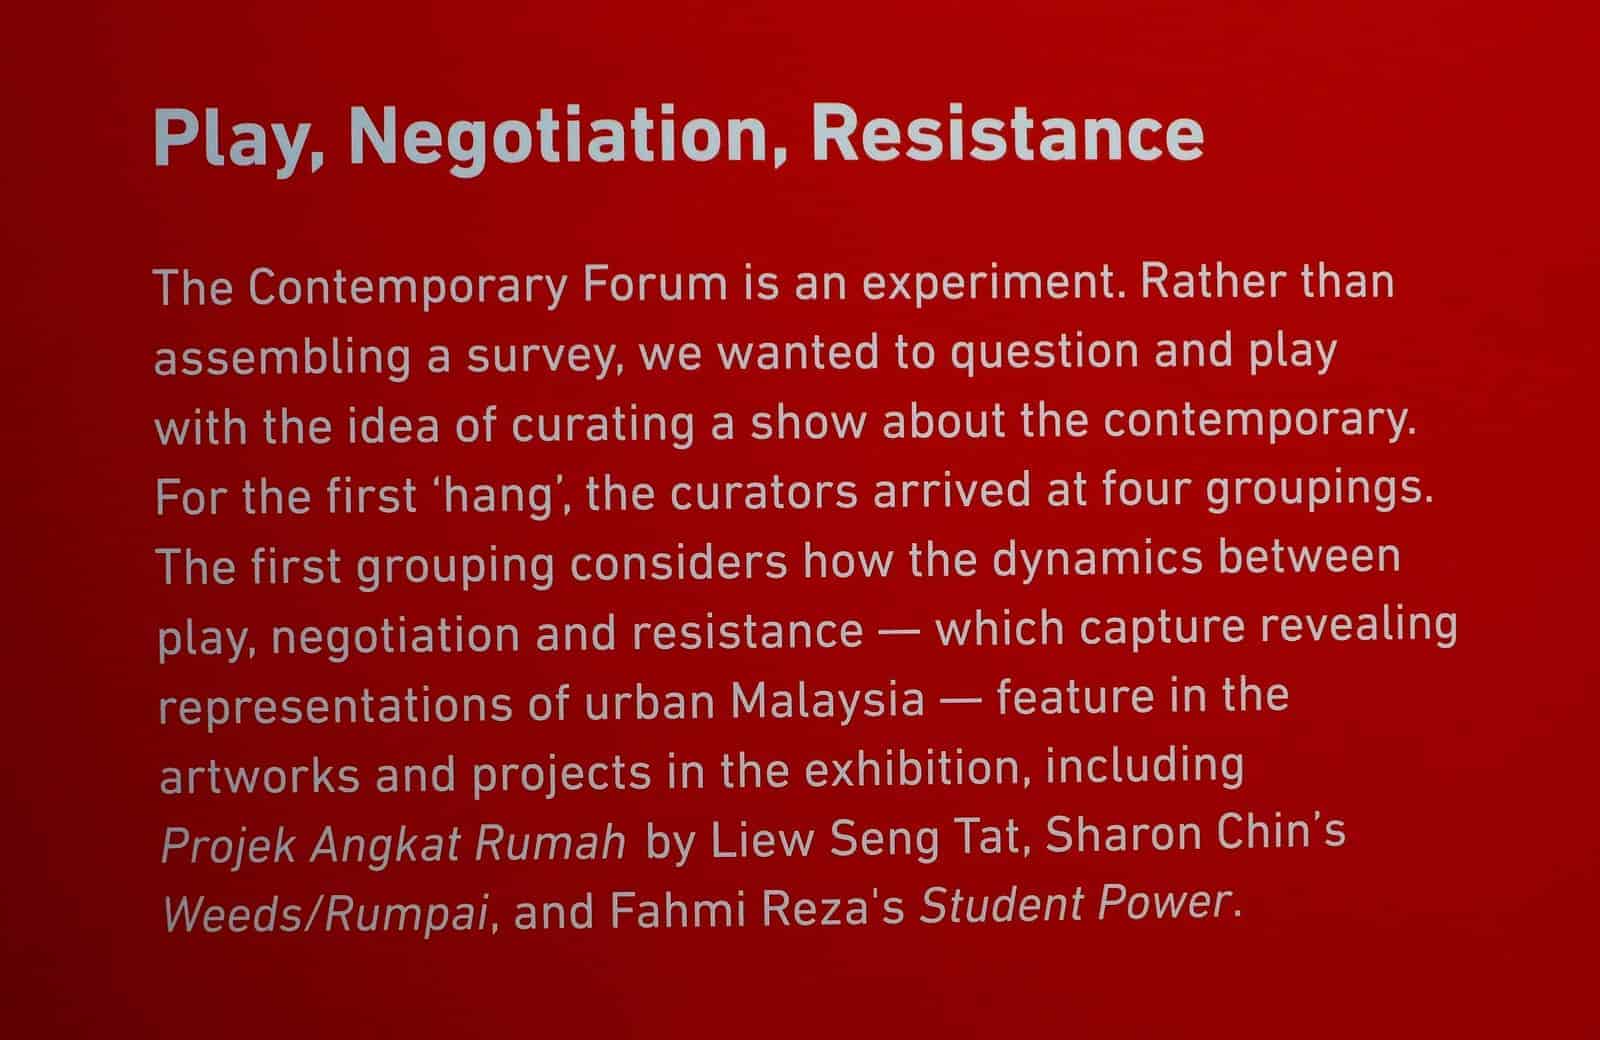 Play, Negotiation, Resistance